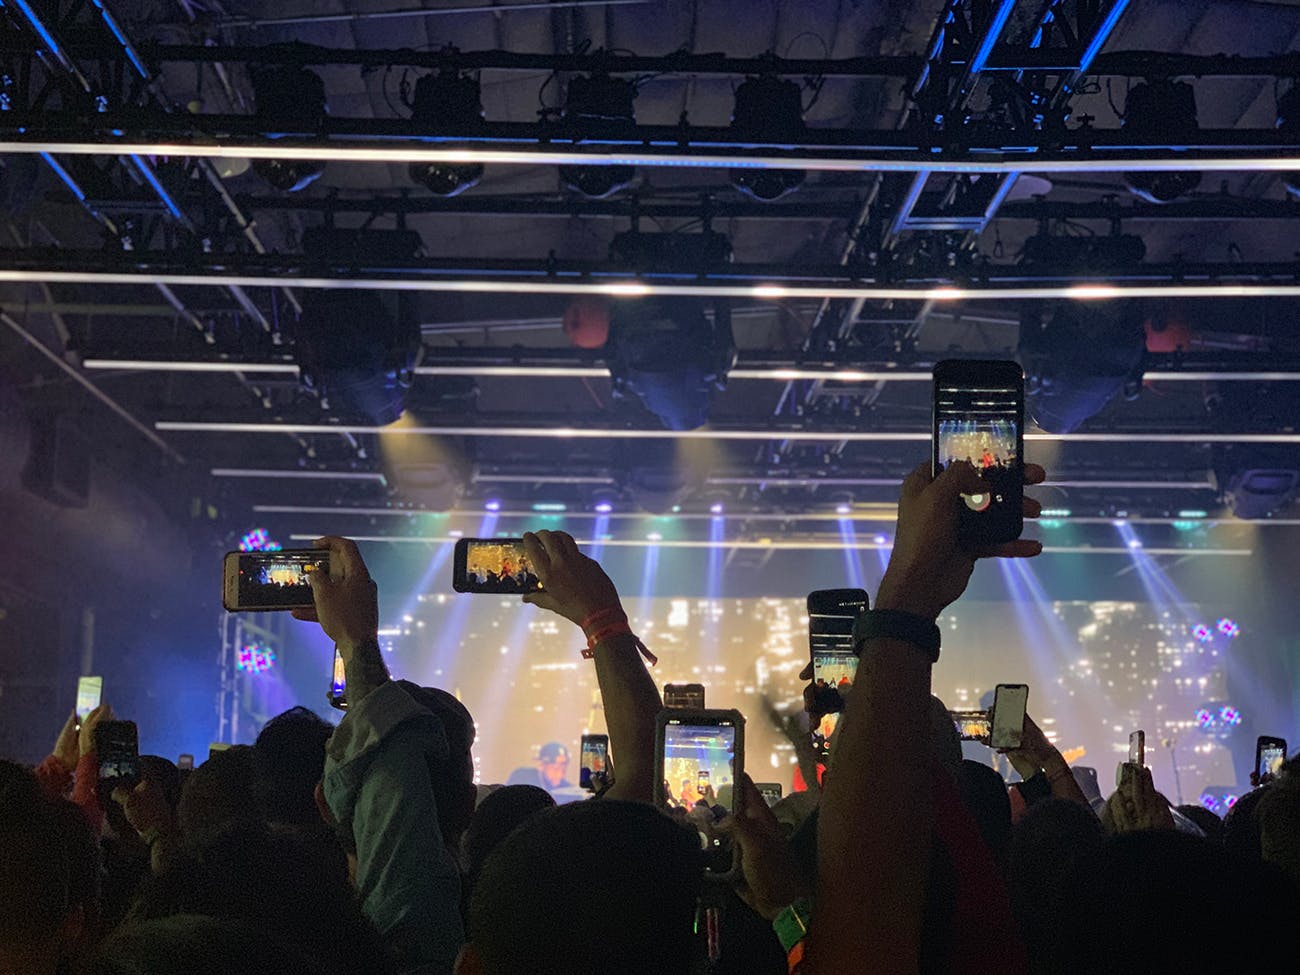 Fans documents Khalid's performance at SXSW on their phones.